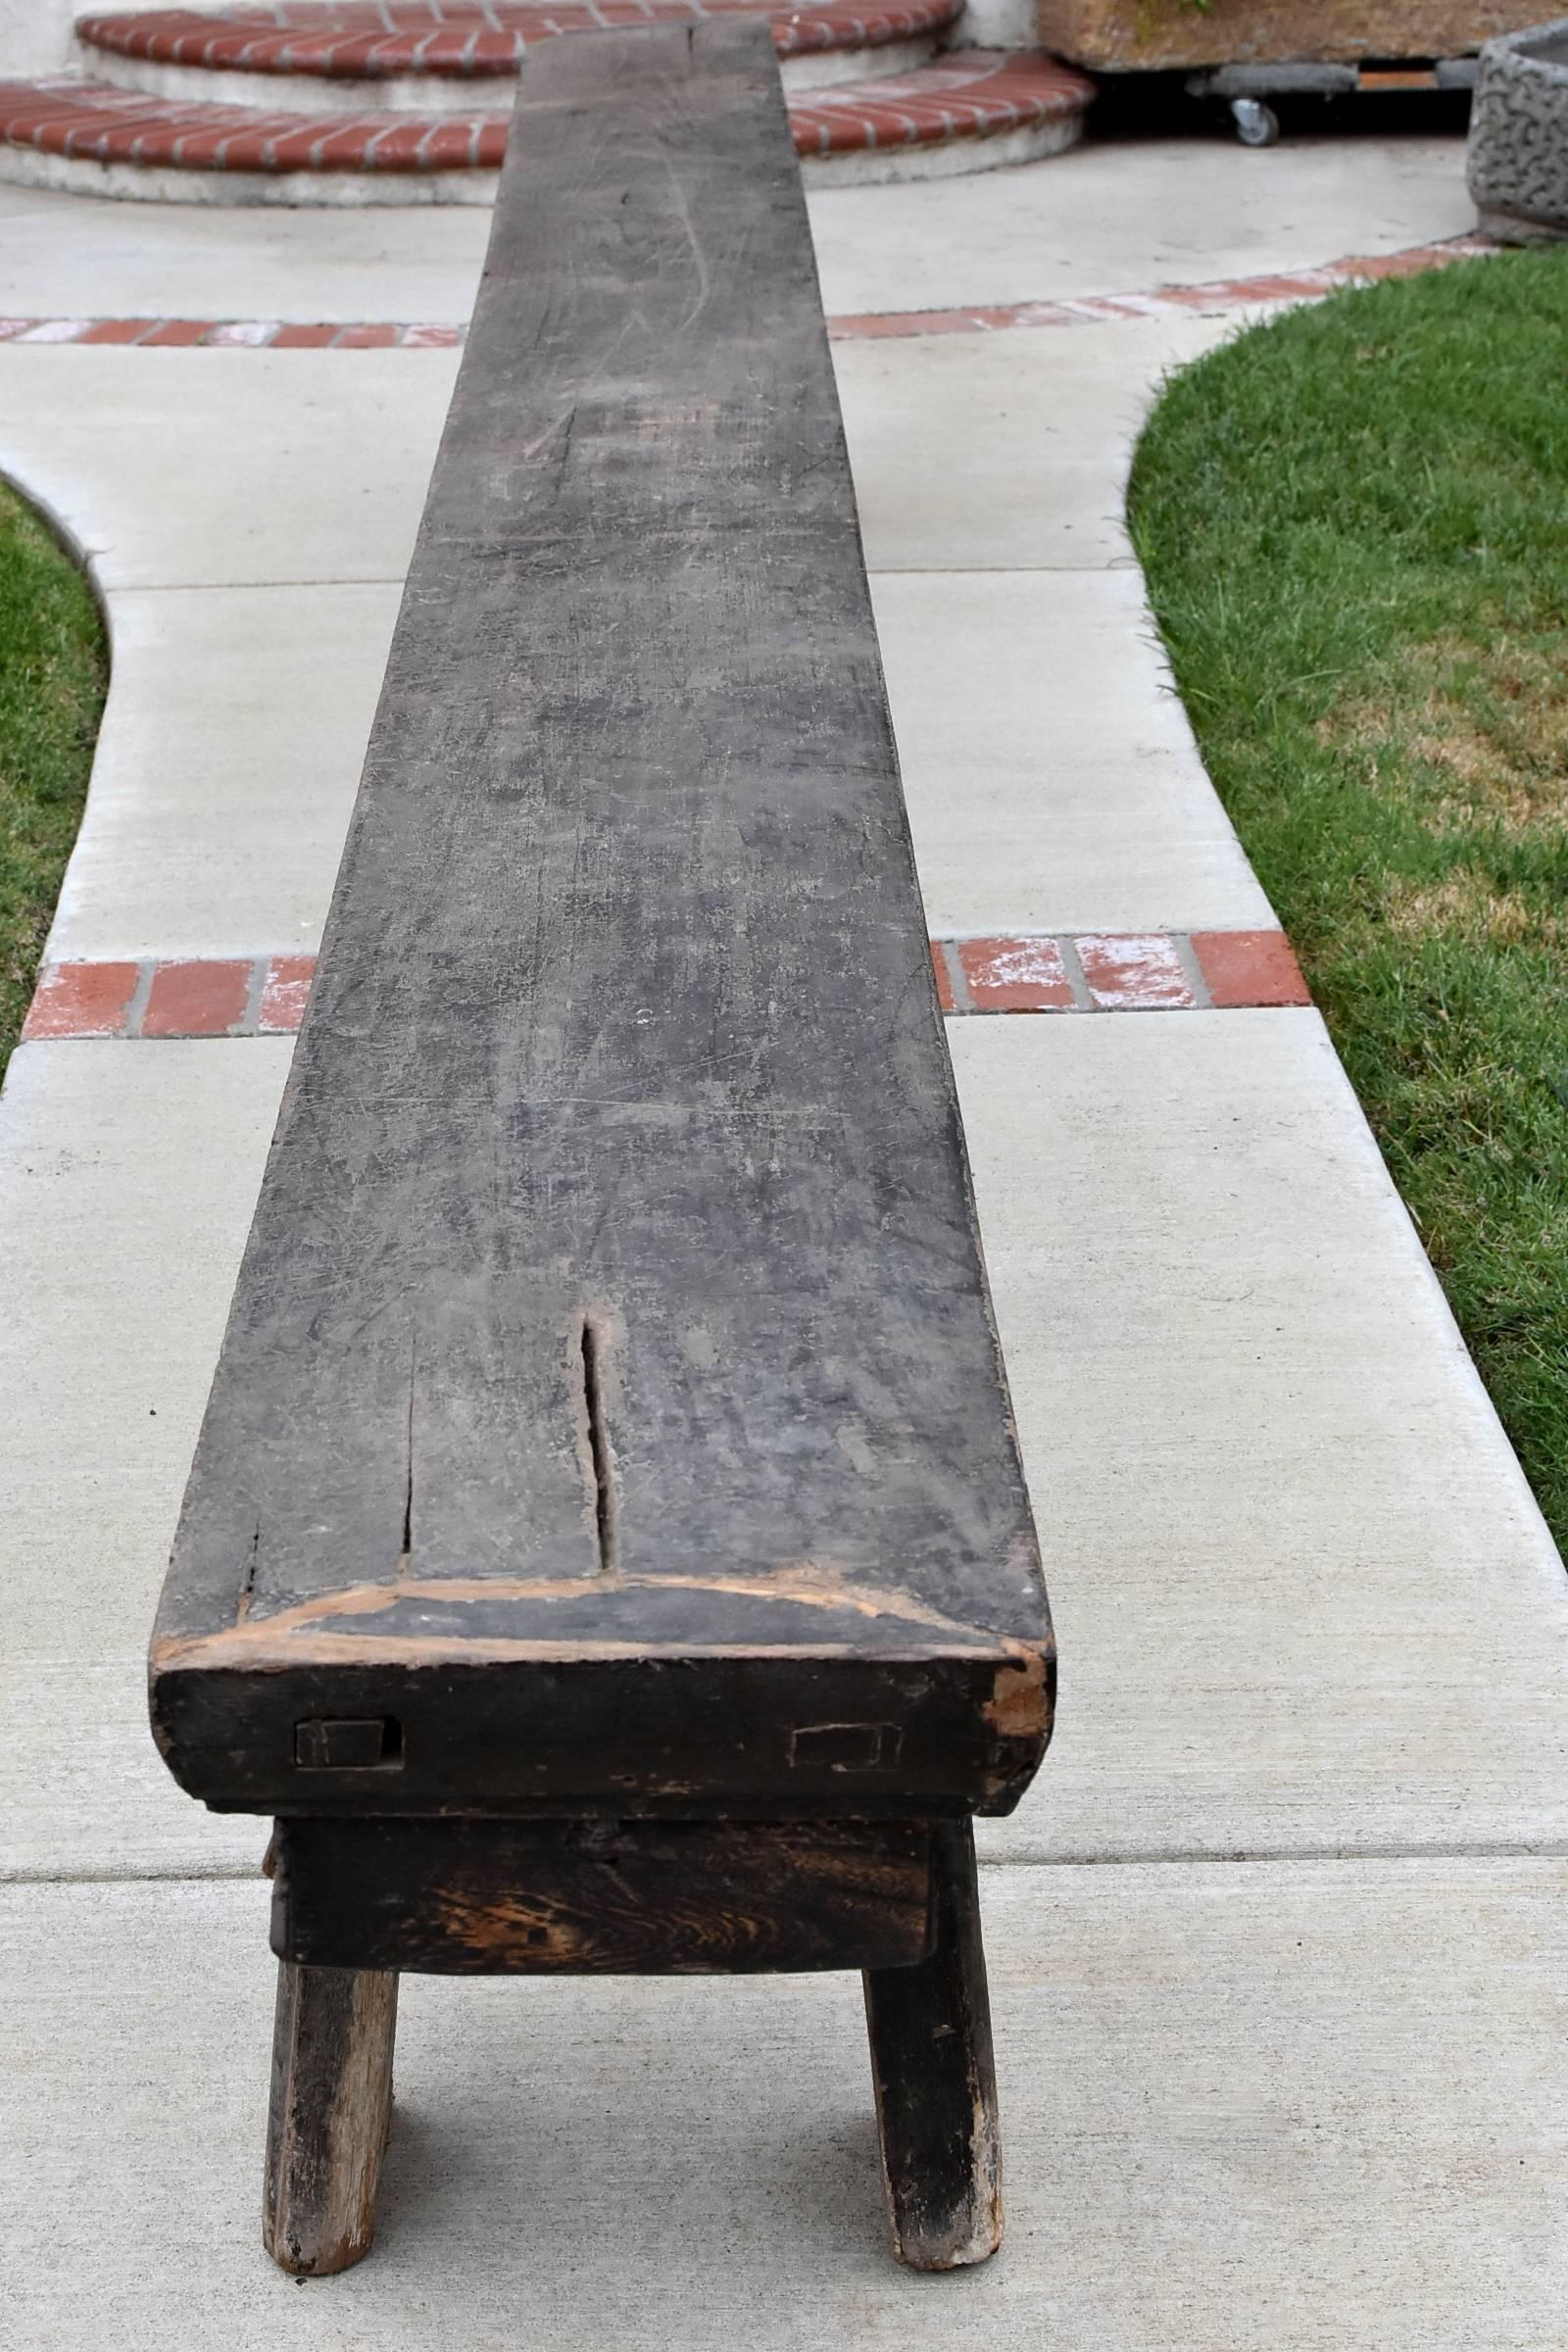 An extraordinary bench that measures 16'4" long. 

This rare piece came from Shan Xi, China. The top is one single board that is 3.5" thick and 13.5" wide! The legs are 6" wide! All solid, single board of wood. Brackets of